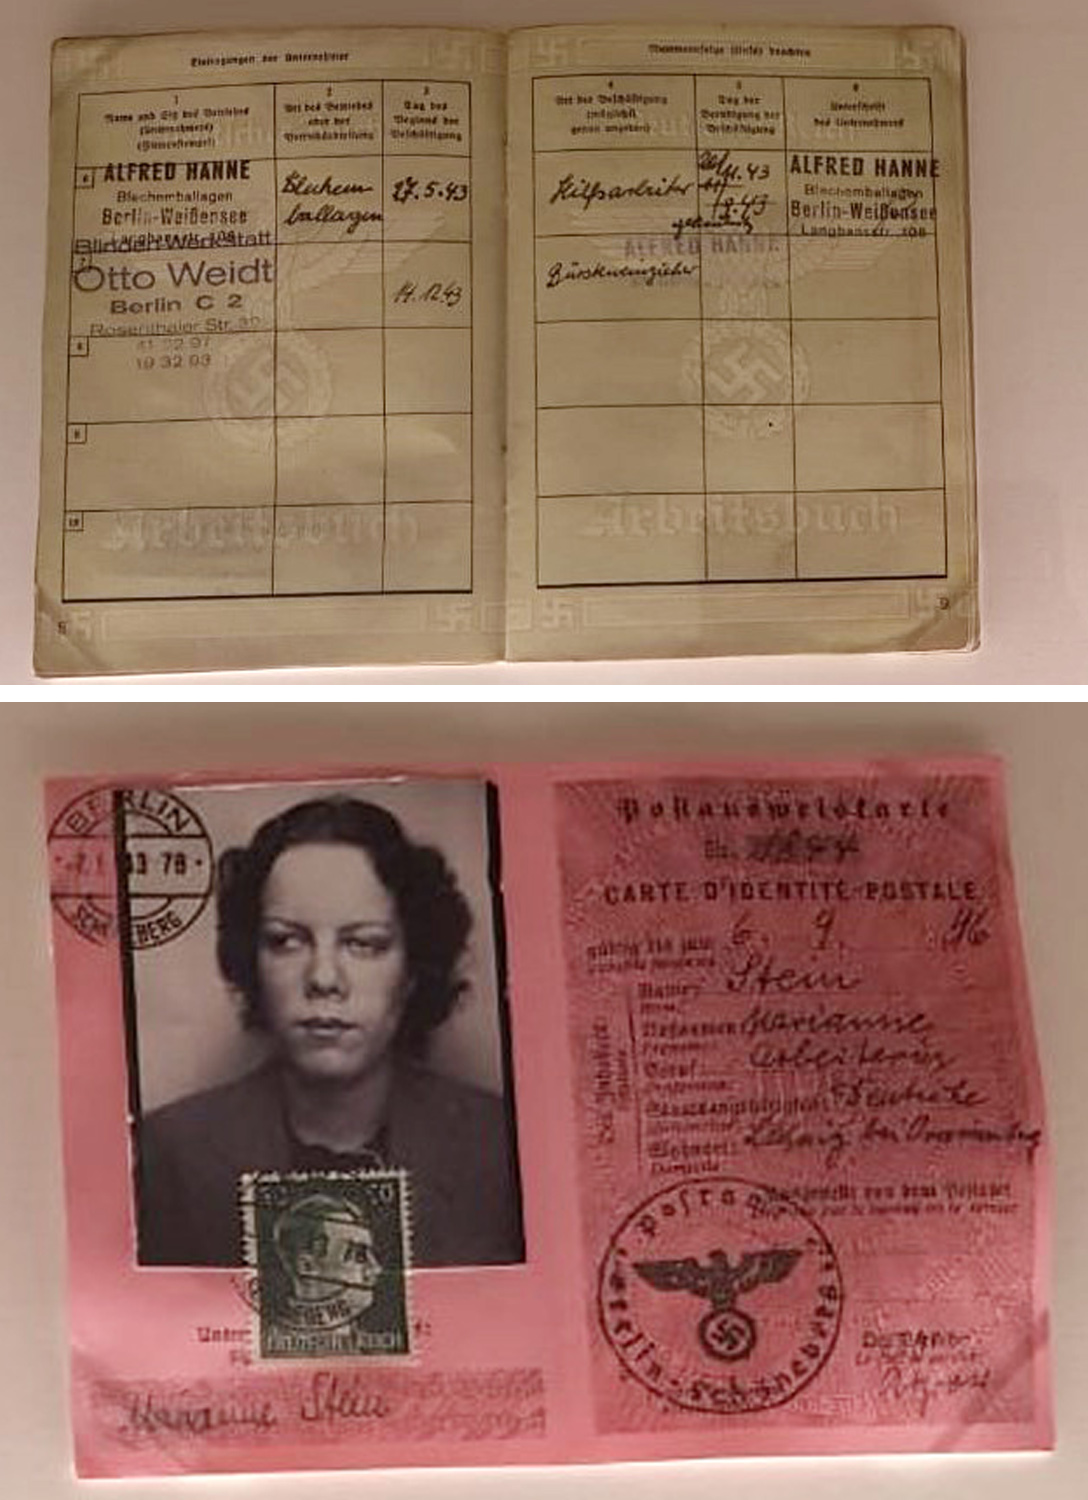 Photo of a passbook of one of the blind workers saved by working in Otto Weidt's factory in Berlin